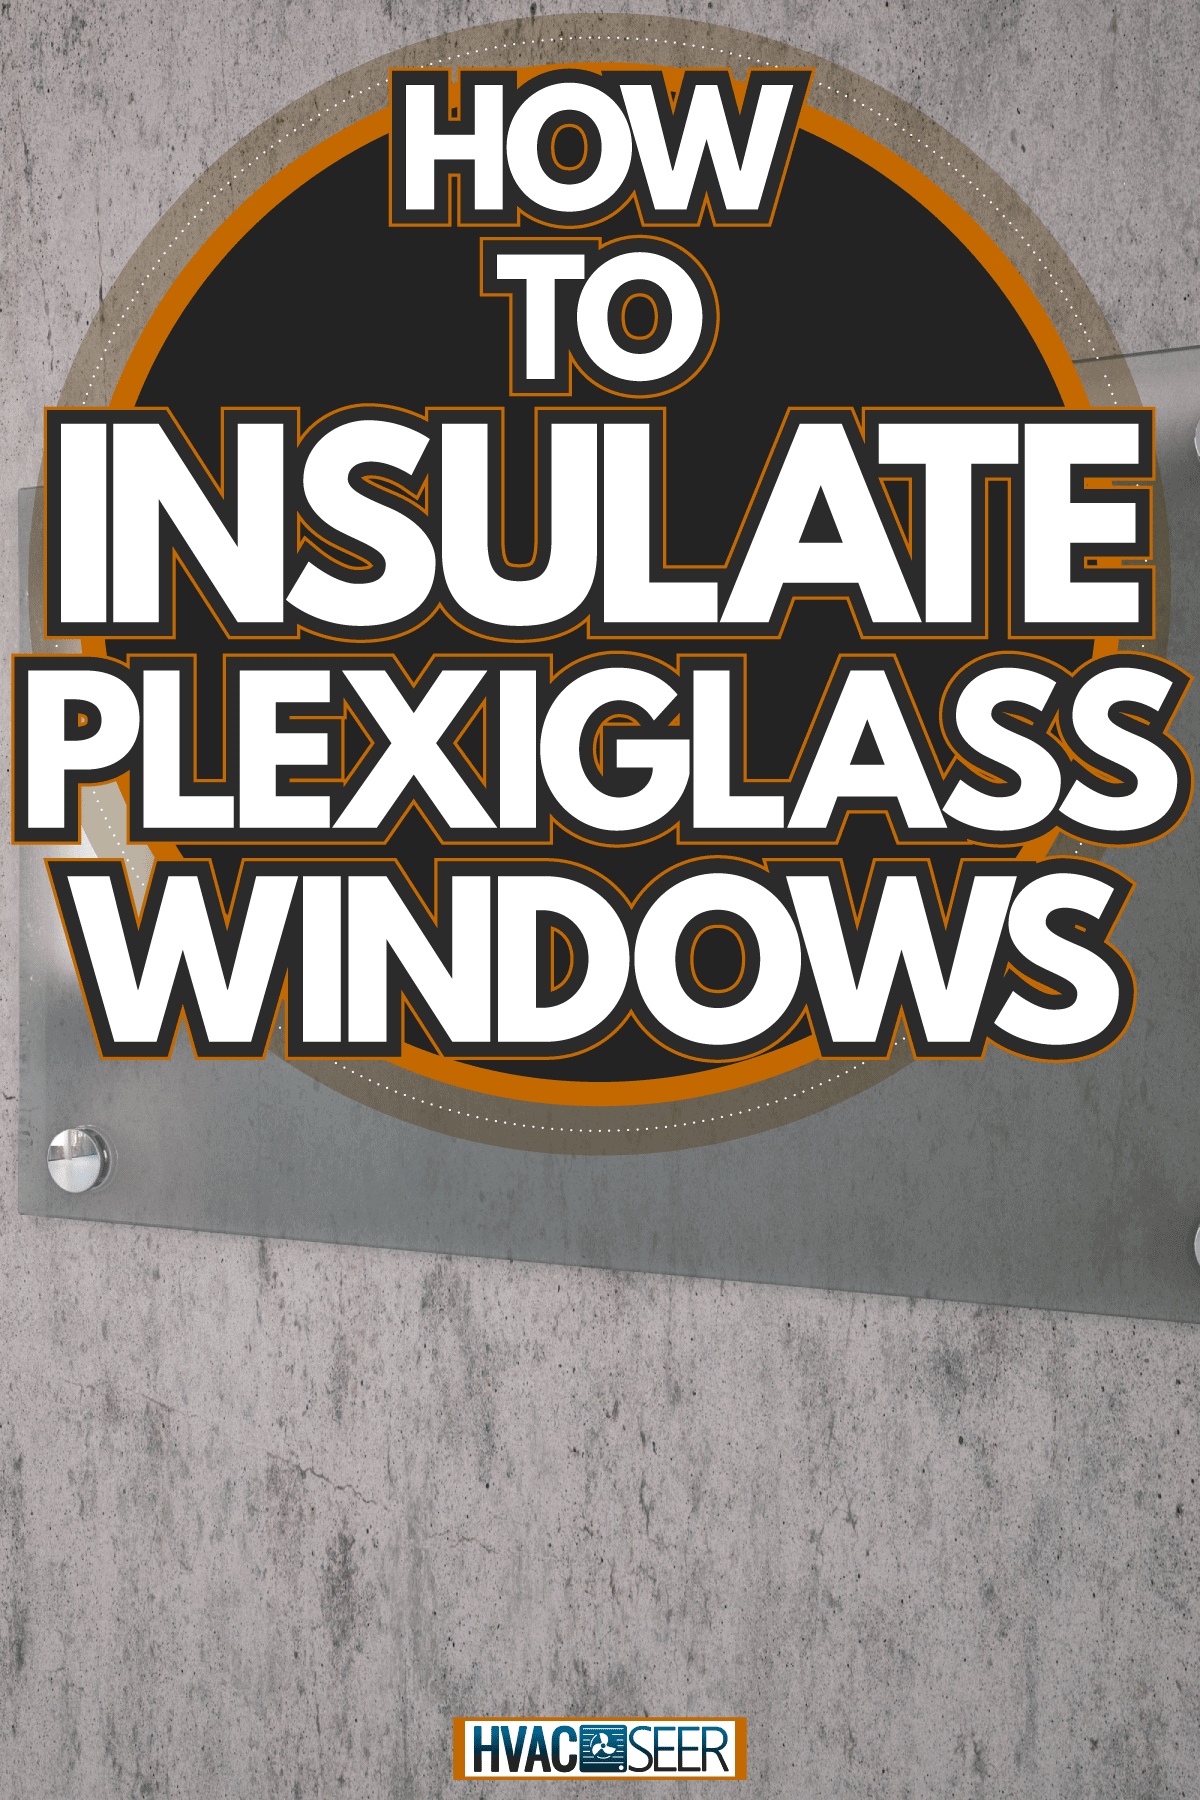 Plexiglass used for placing name plates of an office, How To Insulate Plexiglass Windows